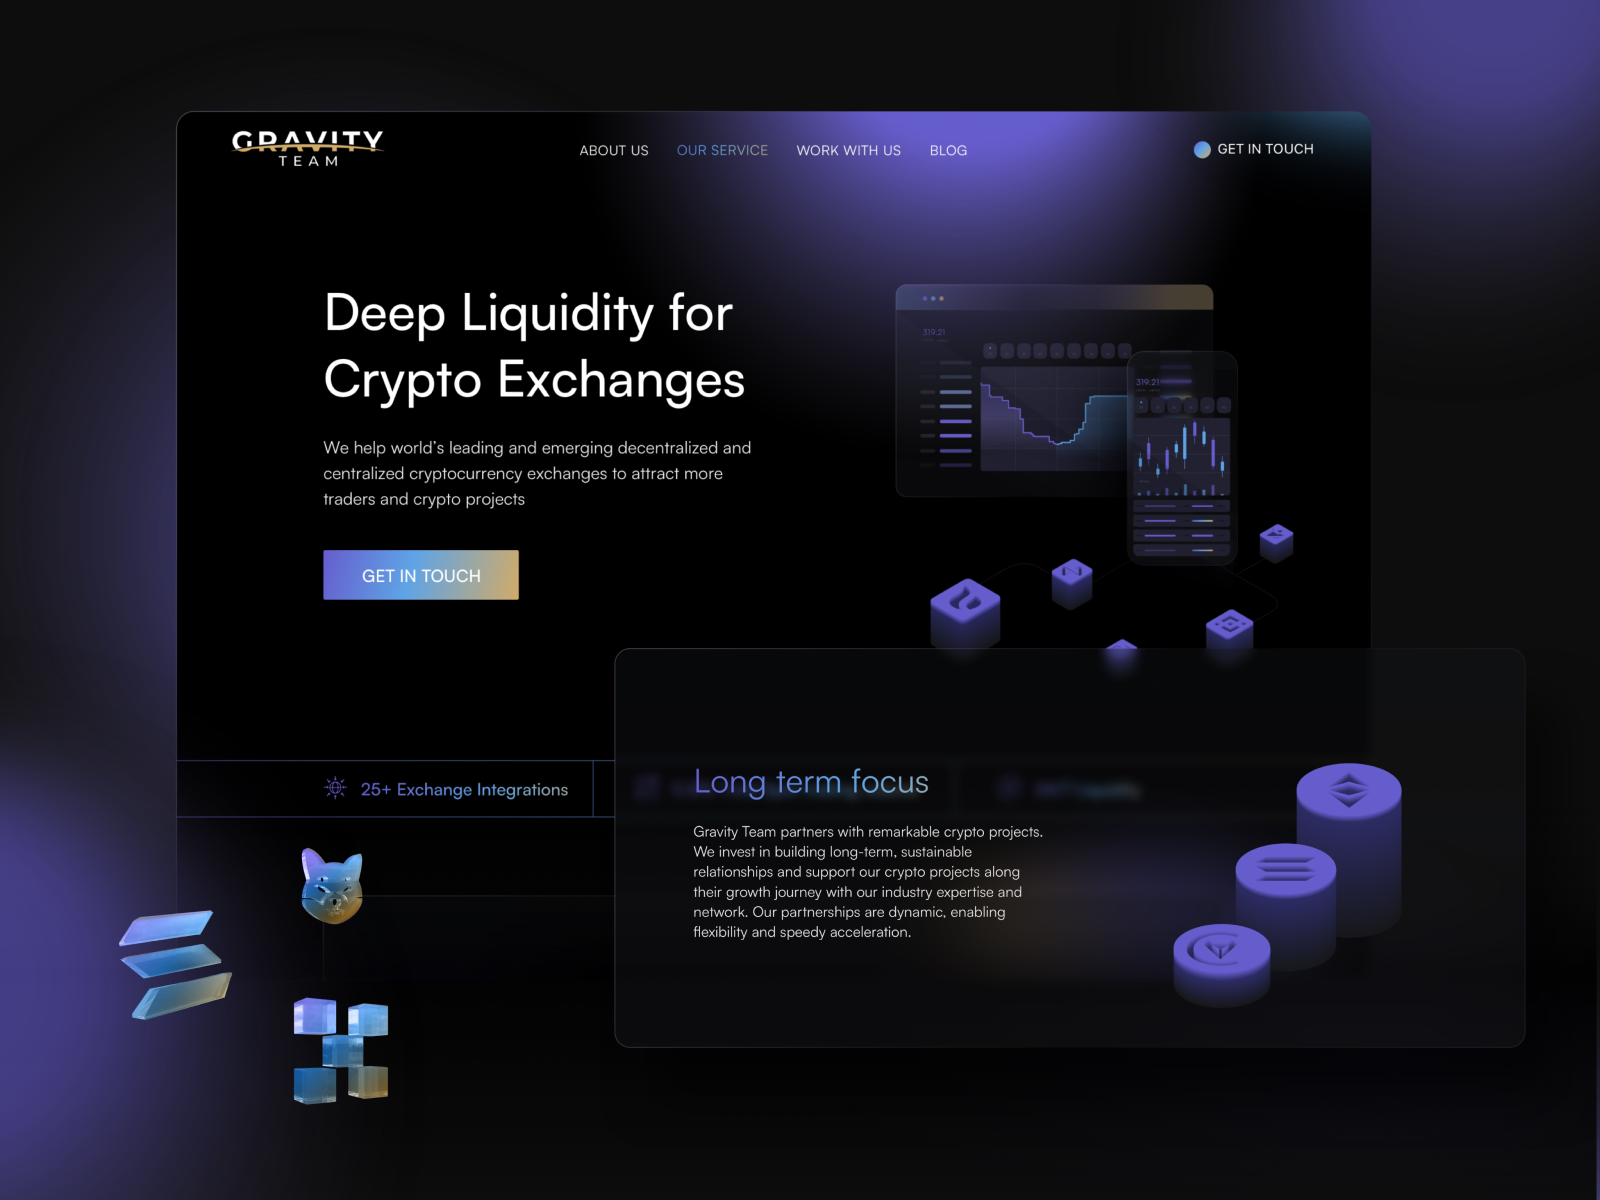 Gravity Team: Our services – Liquidity for Crypto Exchanges